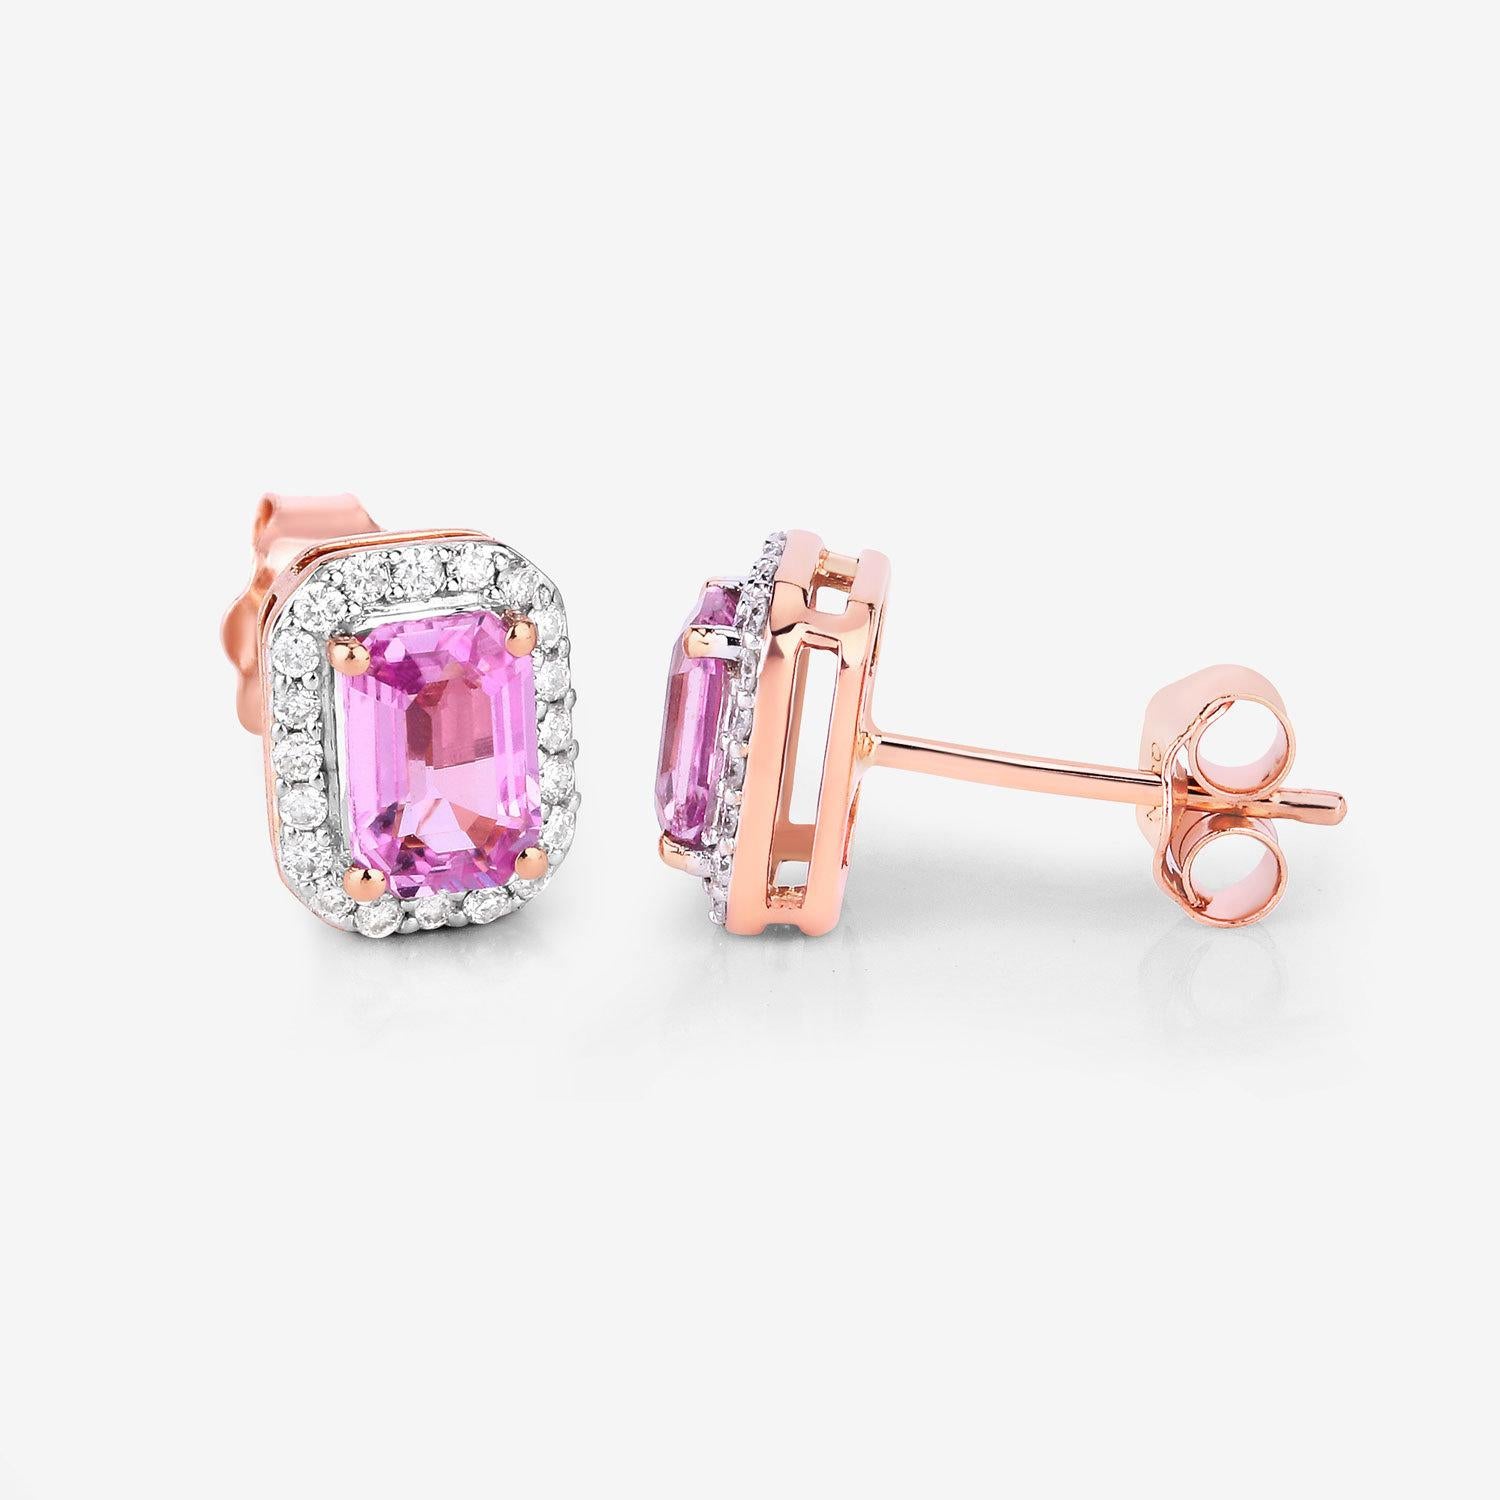 Emerald Cut Natural Pink Sapphire & Diamond Halo Earrings Total 1.50 Carats 14k Rose Gold For Sale